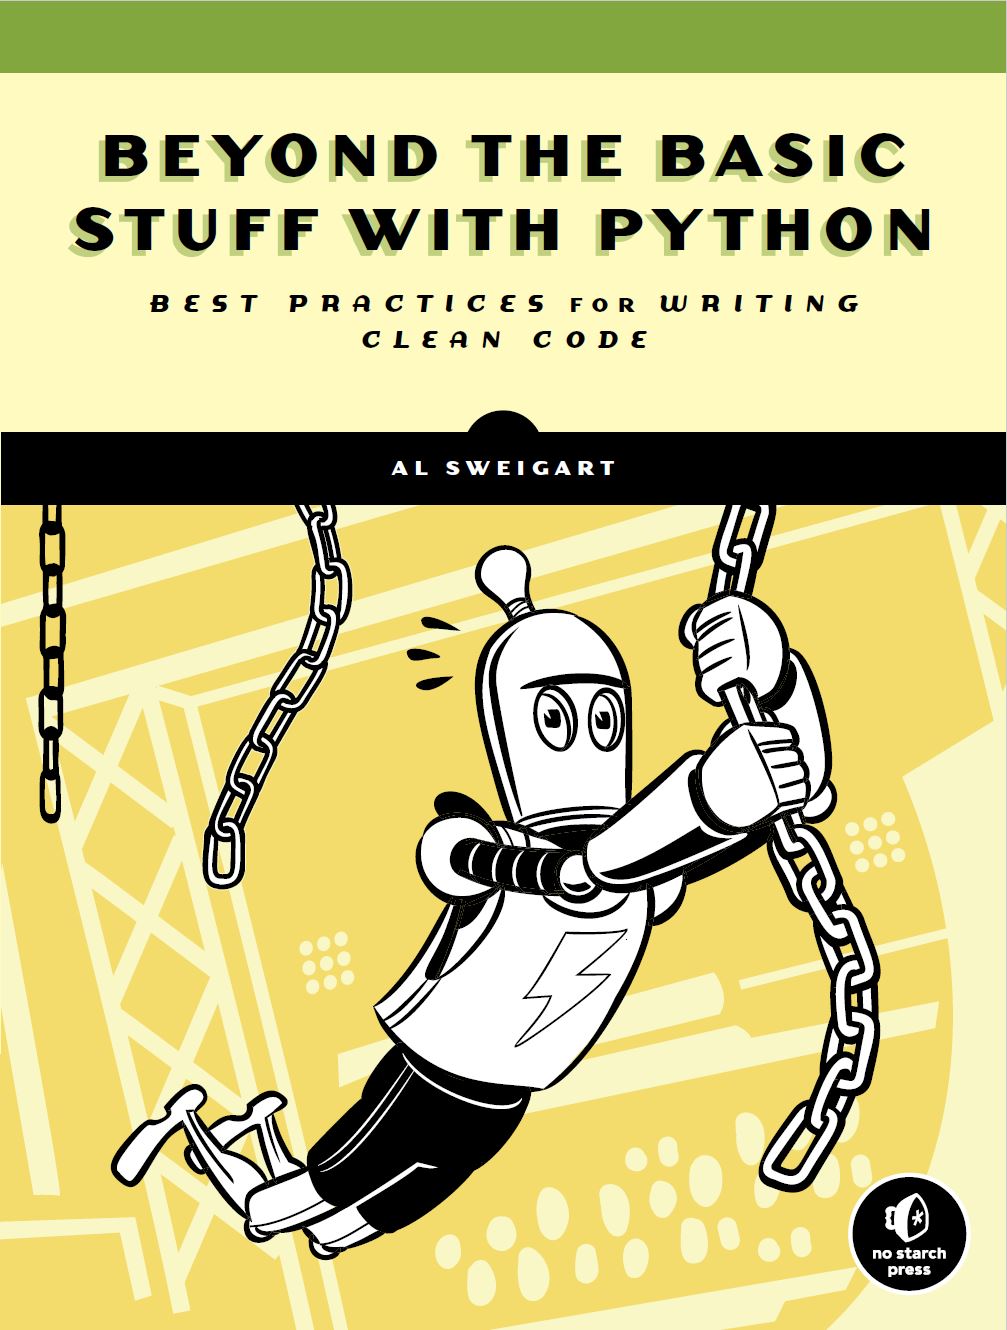 Beyond the Basic Stuff with Python by Al Sweigert